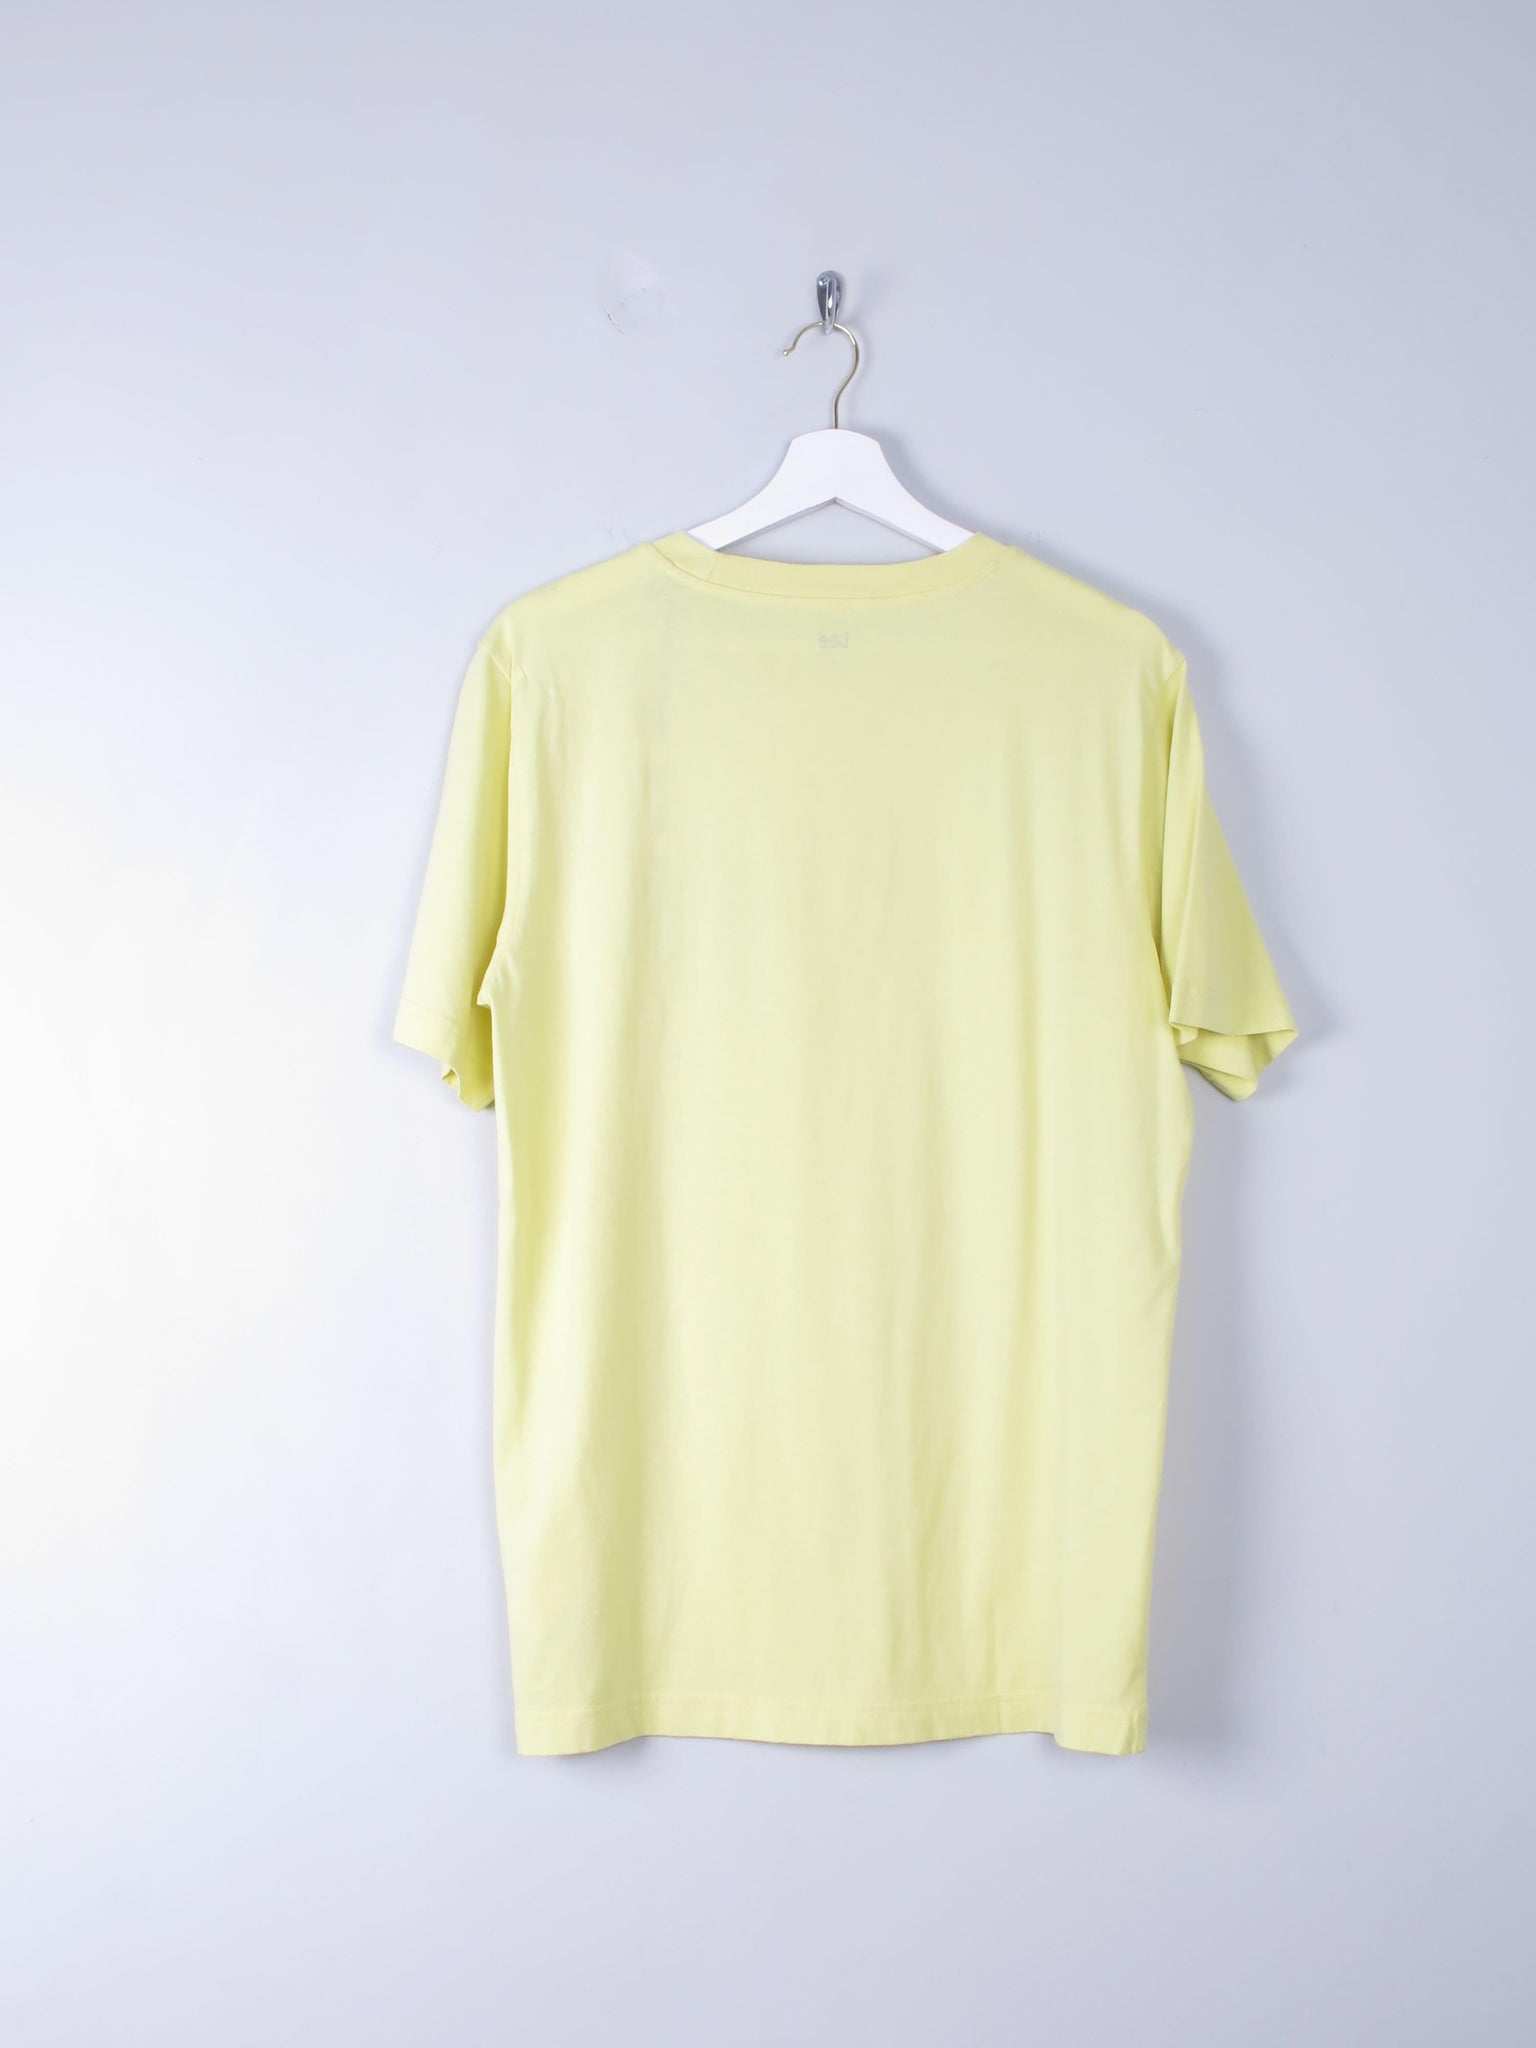 Men's Vintage Style Yellow Lee T-shirt S New - The Harlequin